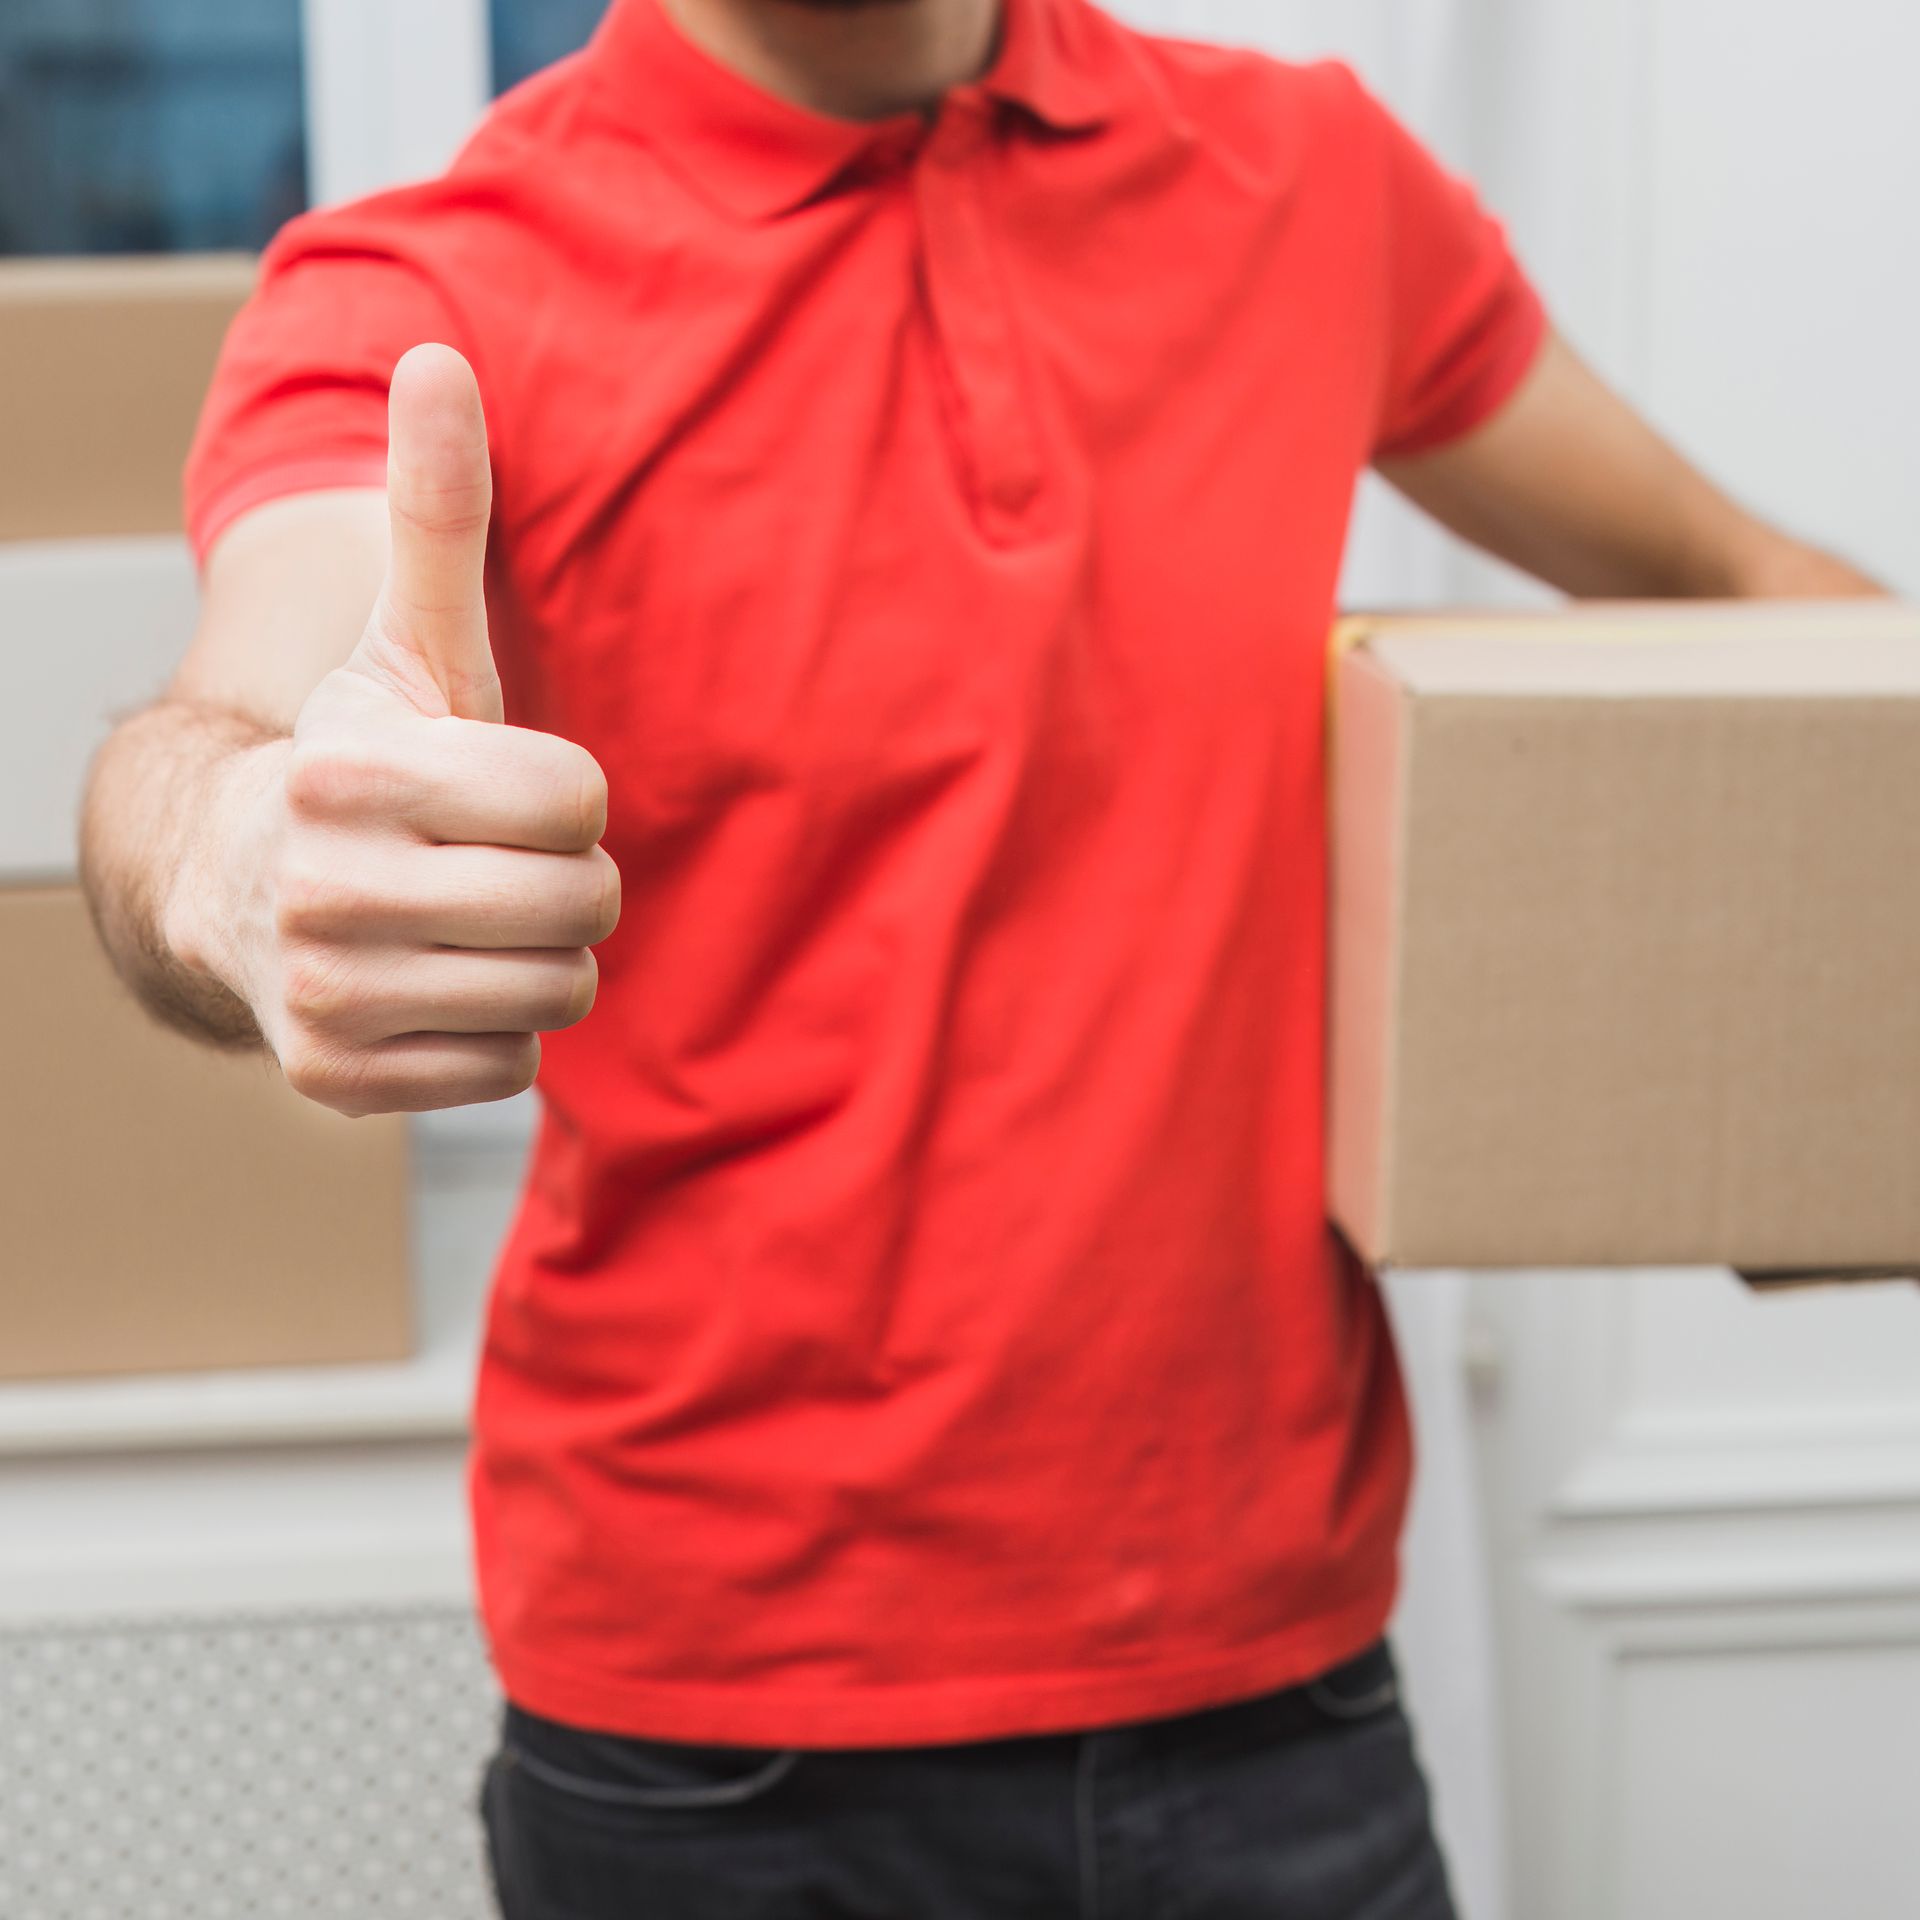 a man in a red shirt is holding a cardboard box and giving a thumbs up